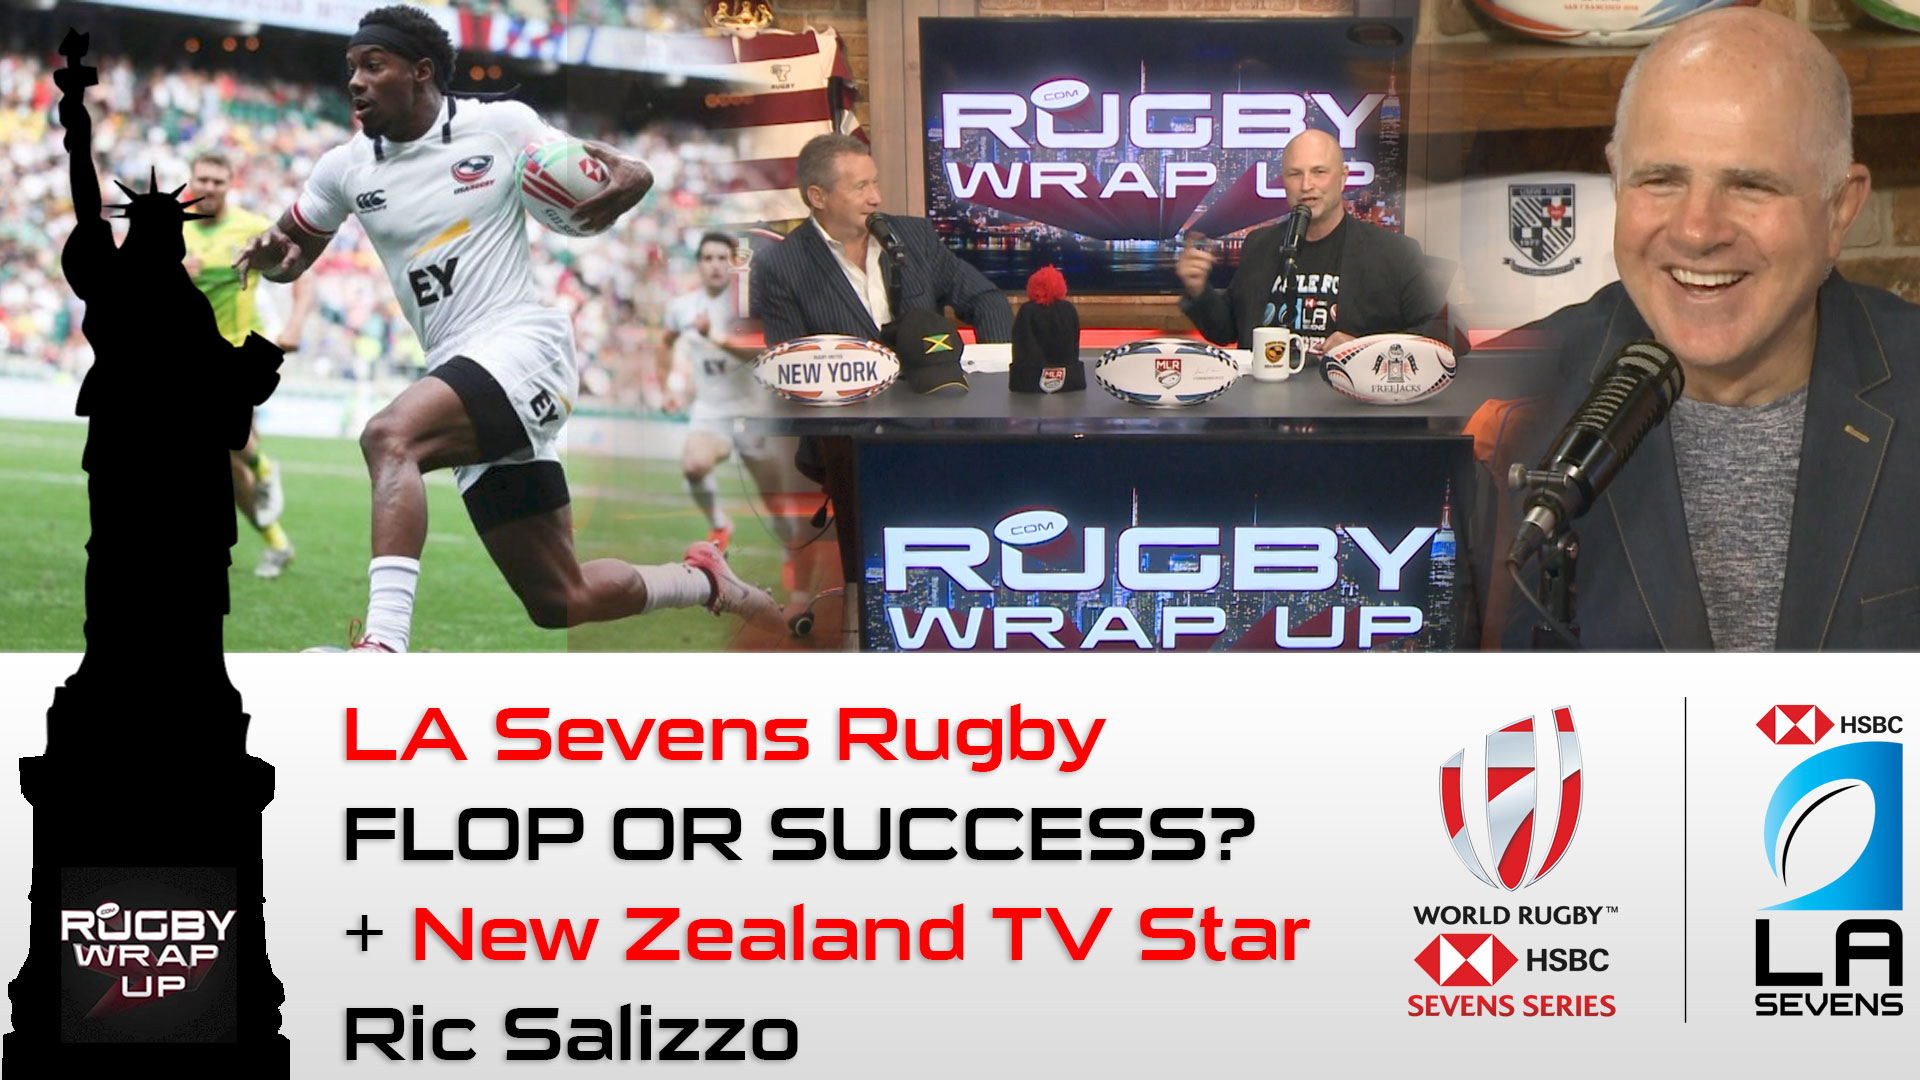 LA-Sevens-Rugby-FLOP-OR-SUCCESS--+-New-Zealand-journalist-Ric-Salizzo, Rugby_Wrap_Up